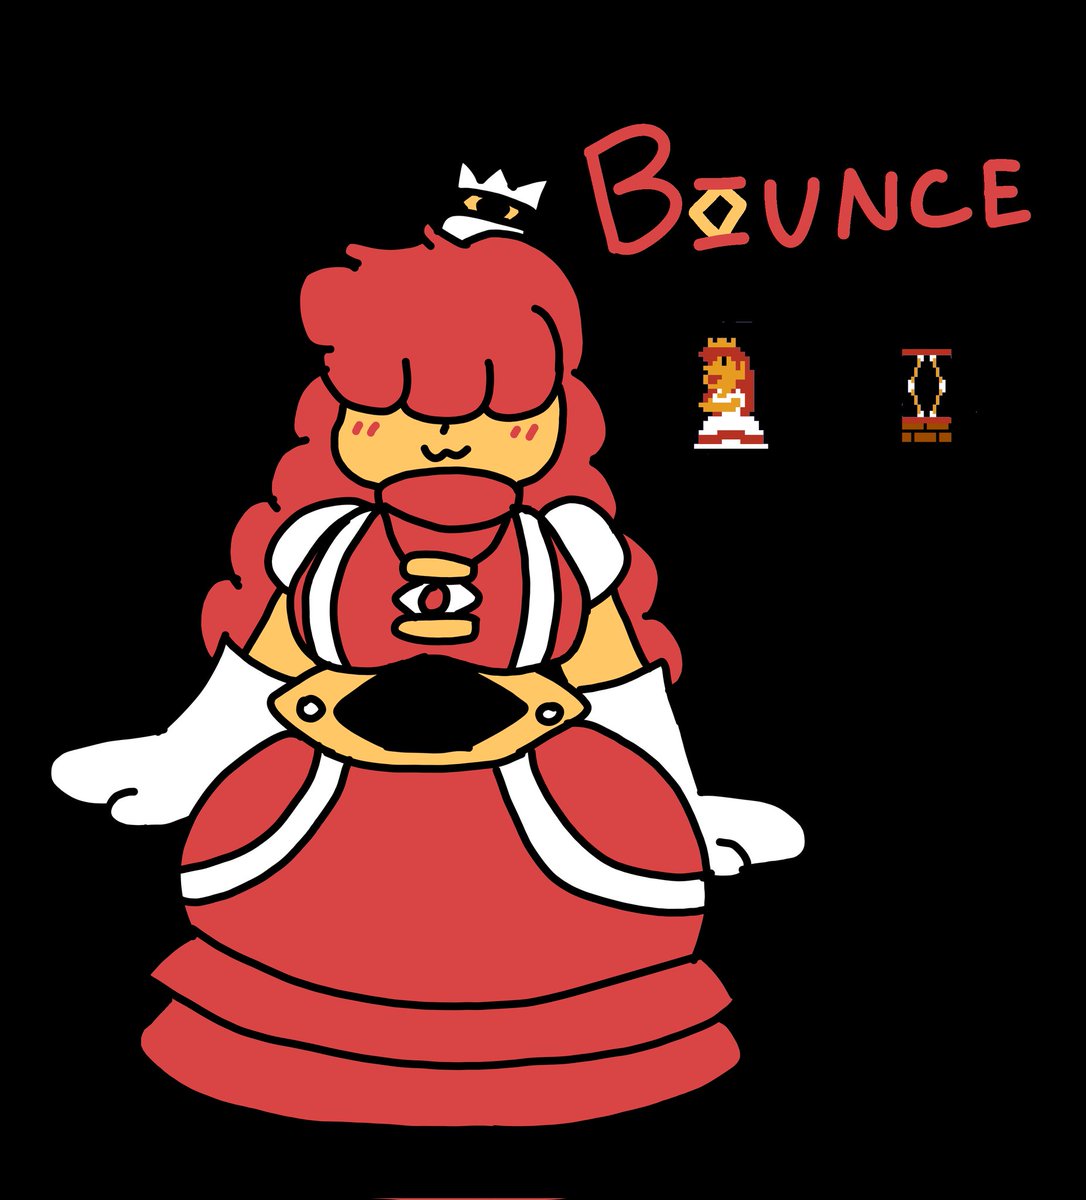 i made a little Minus World OC because I love the concept

This is Bounce, a Princess Toadstool mixed with a spring

#MinusWorld #MinusWorldOC